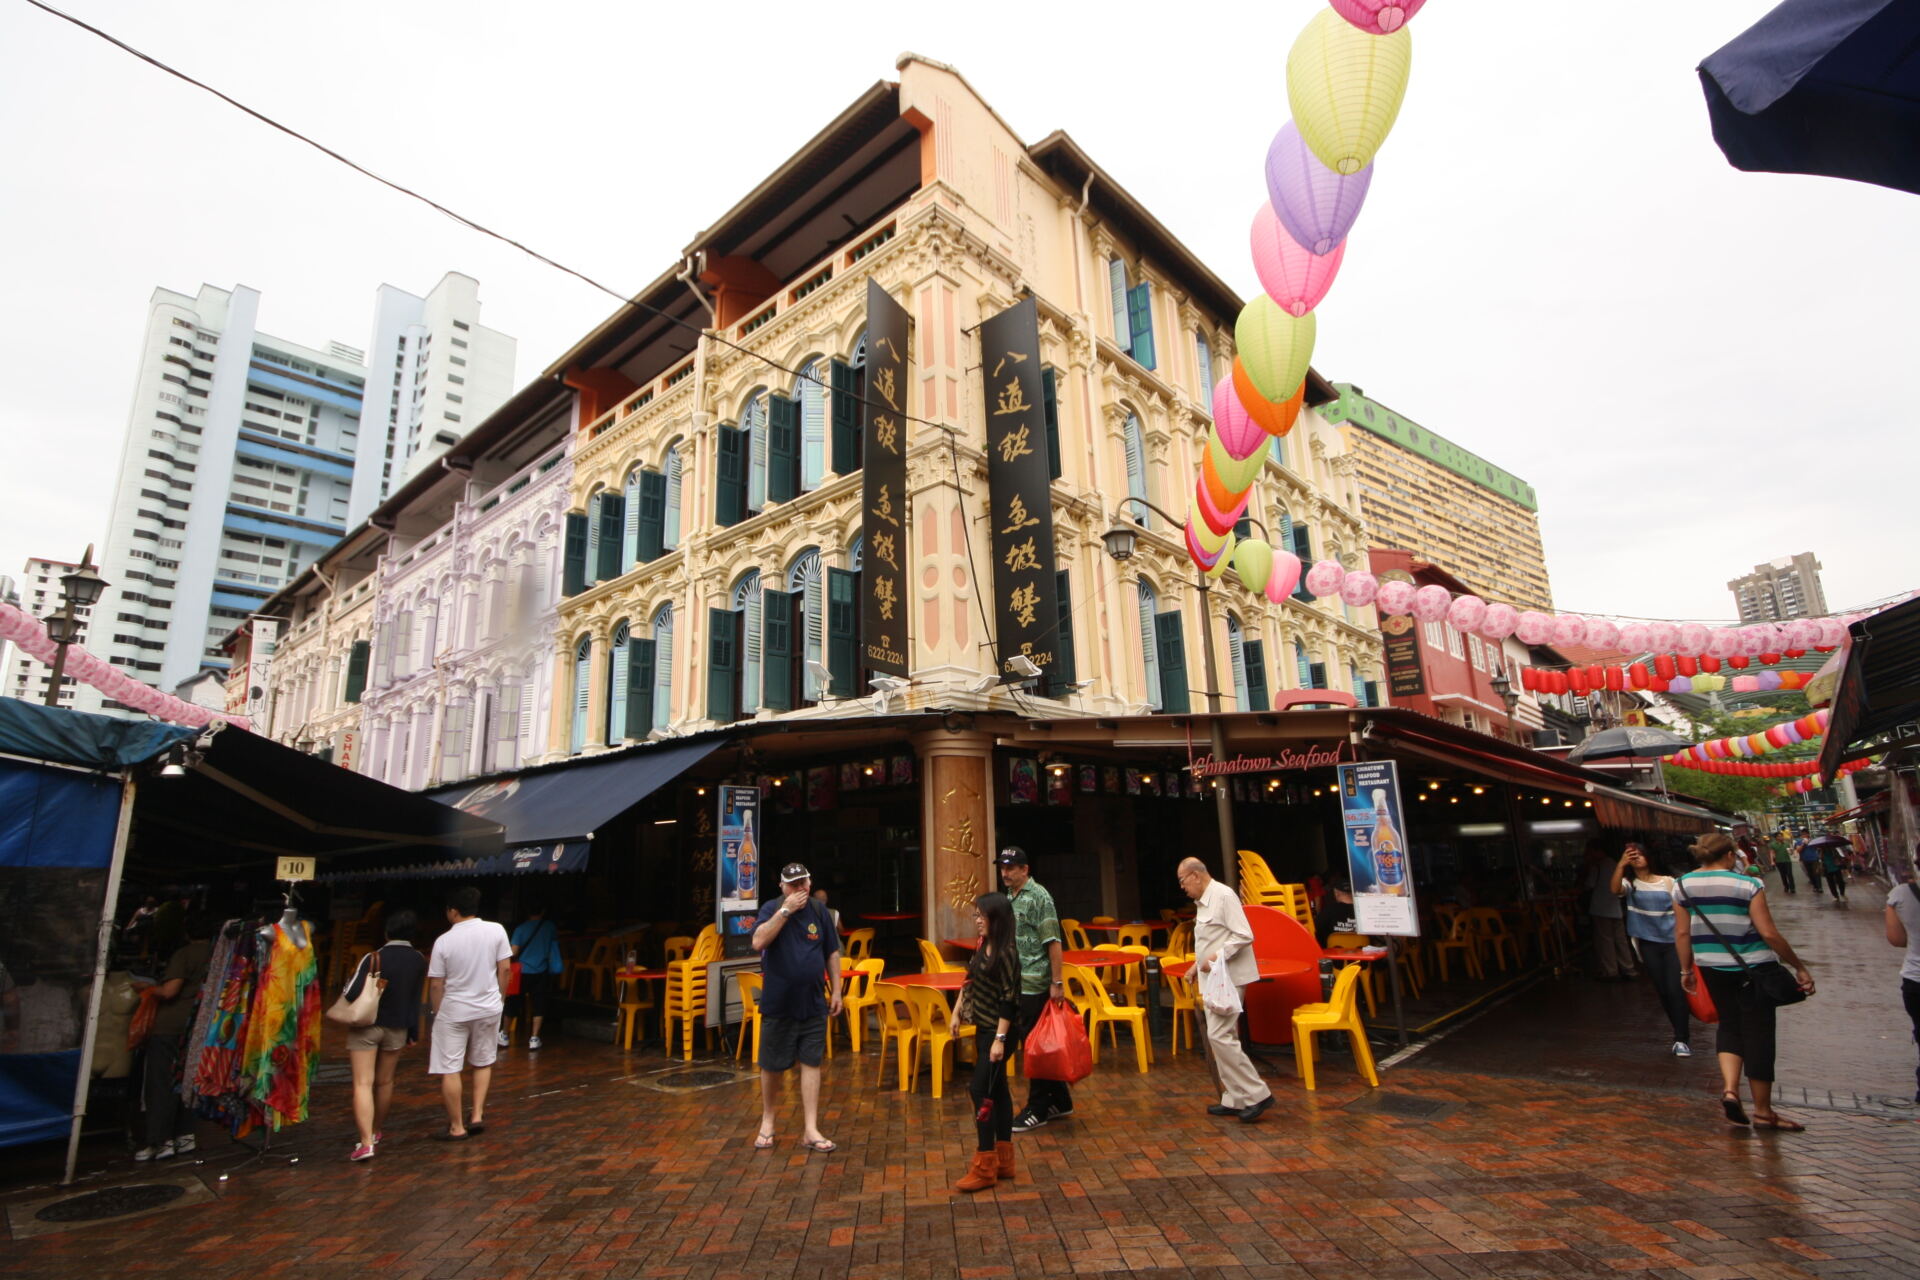 A lively market area in Singapore. JIM BYERS PHOTO